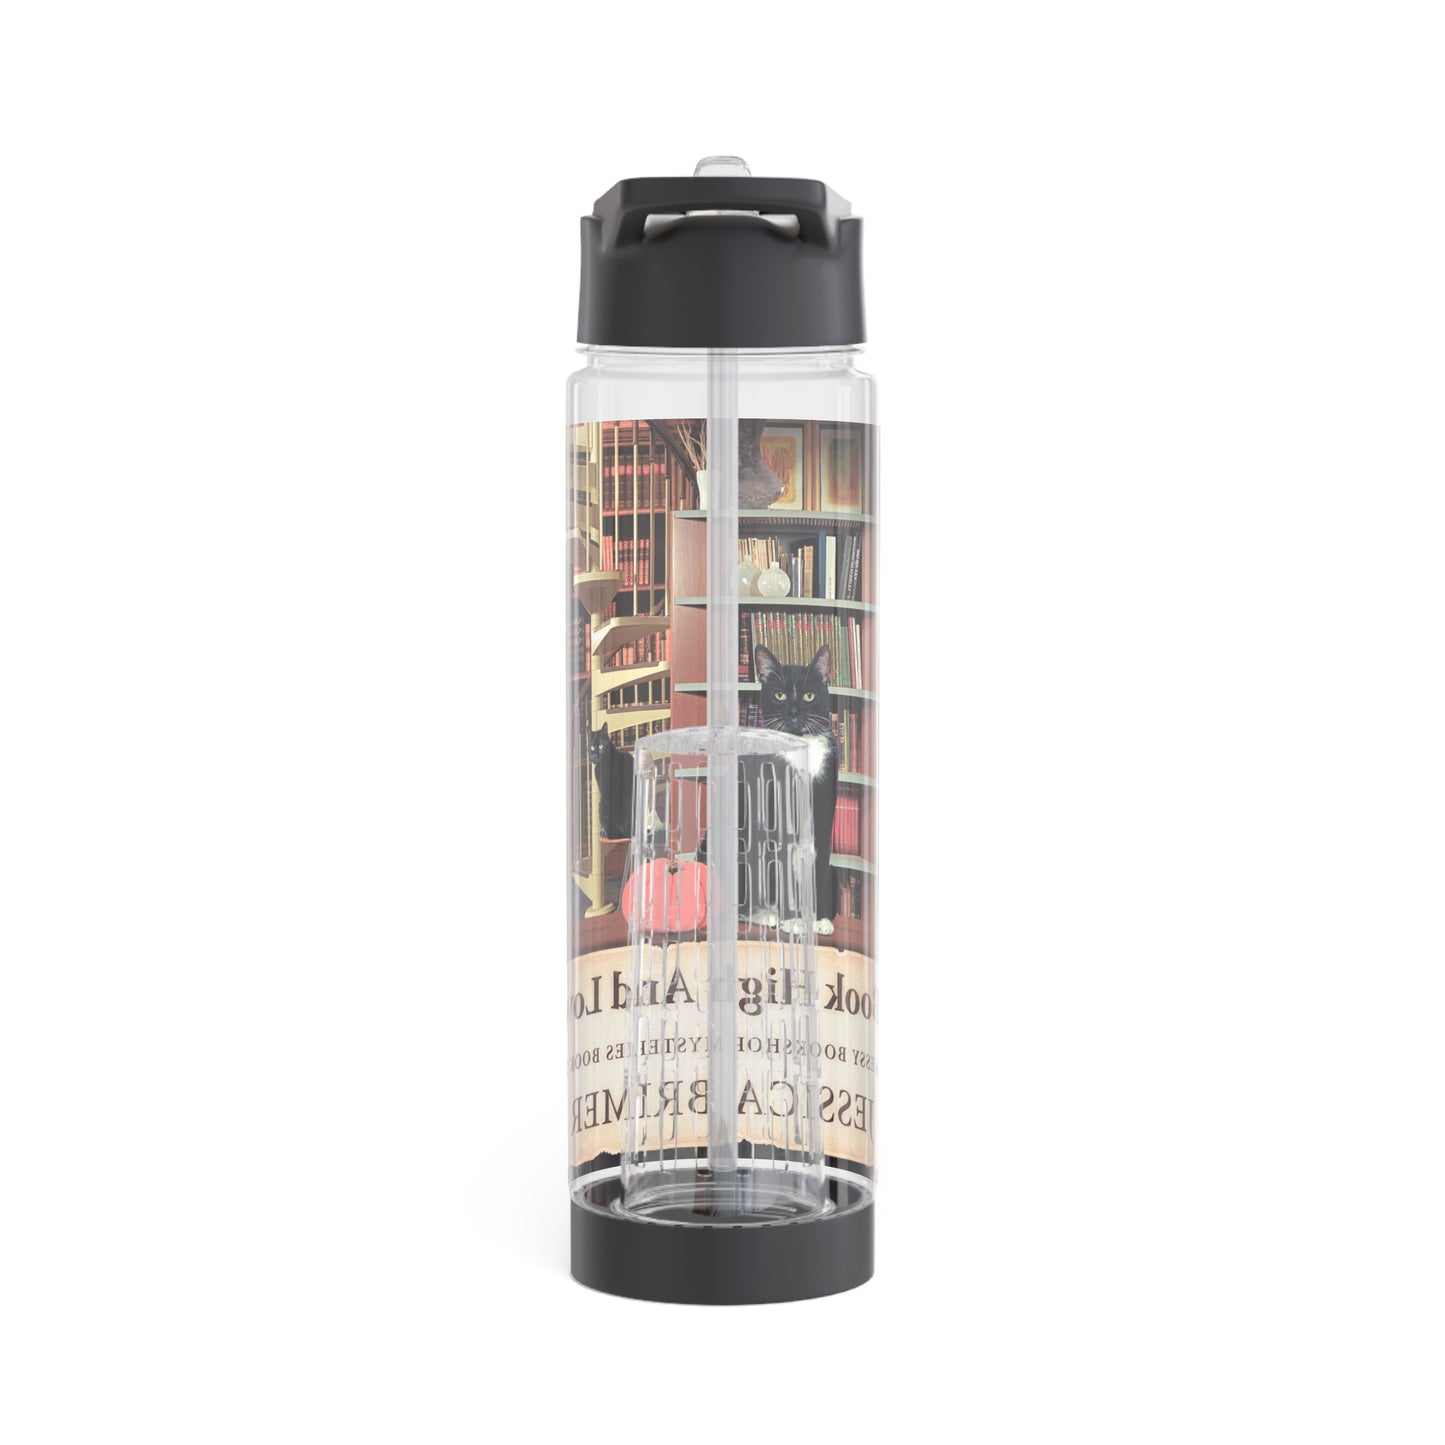 Book High And Low - Infuser Water Bottle